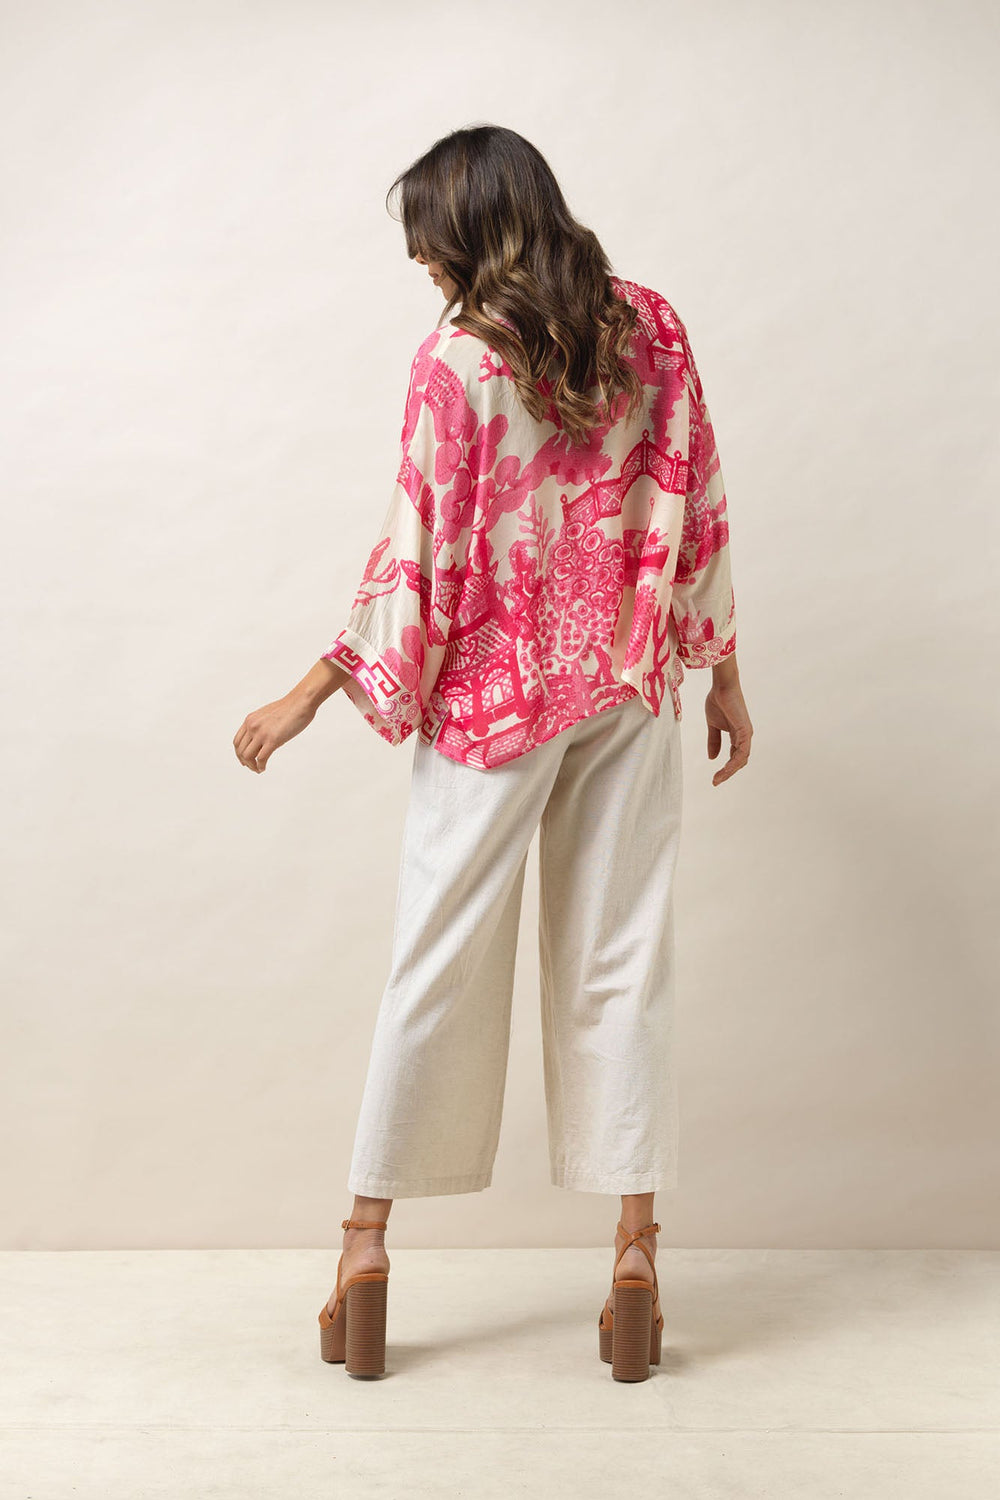 Women's short kimono in pink and white giant willow print by One Hundred Stars